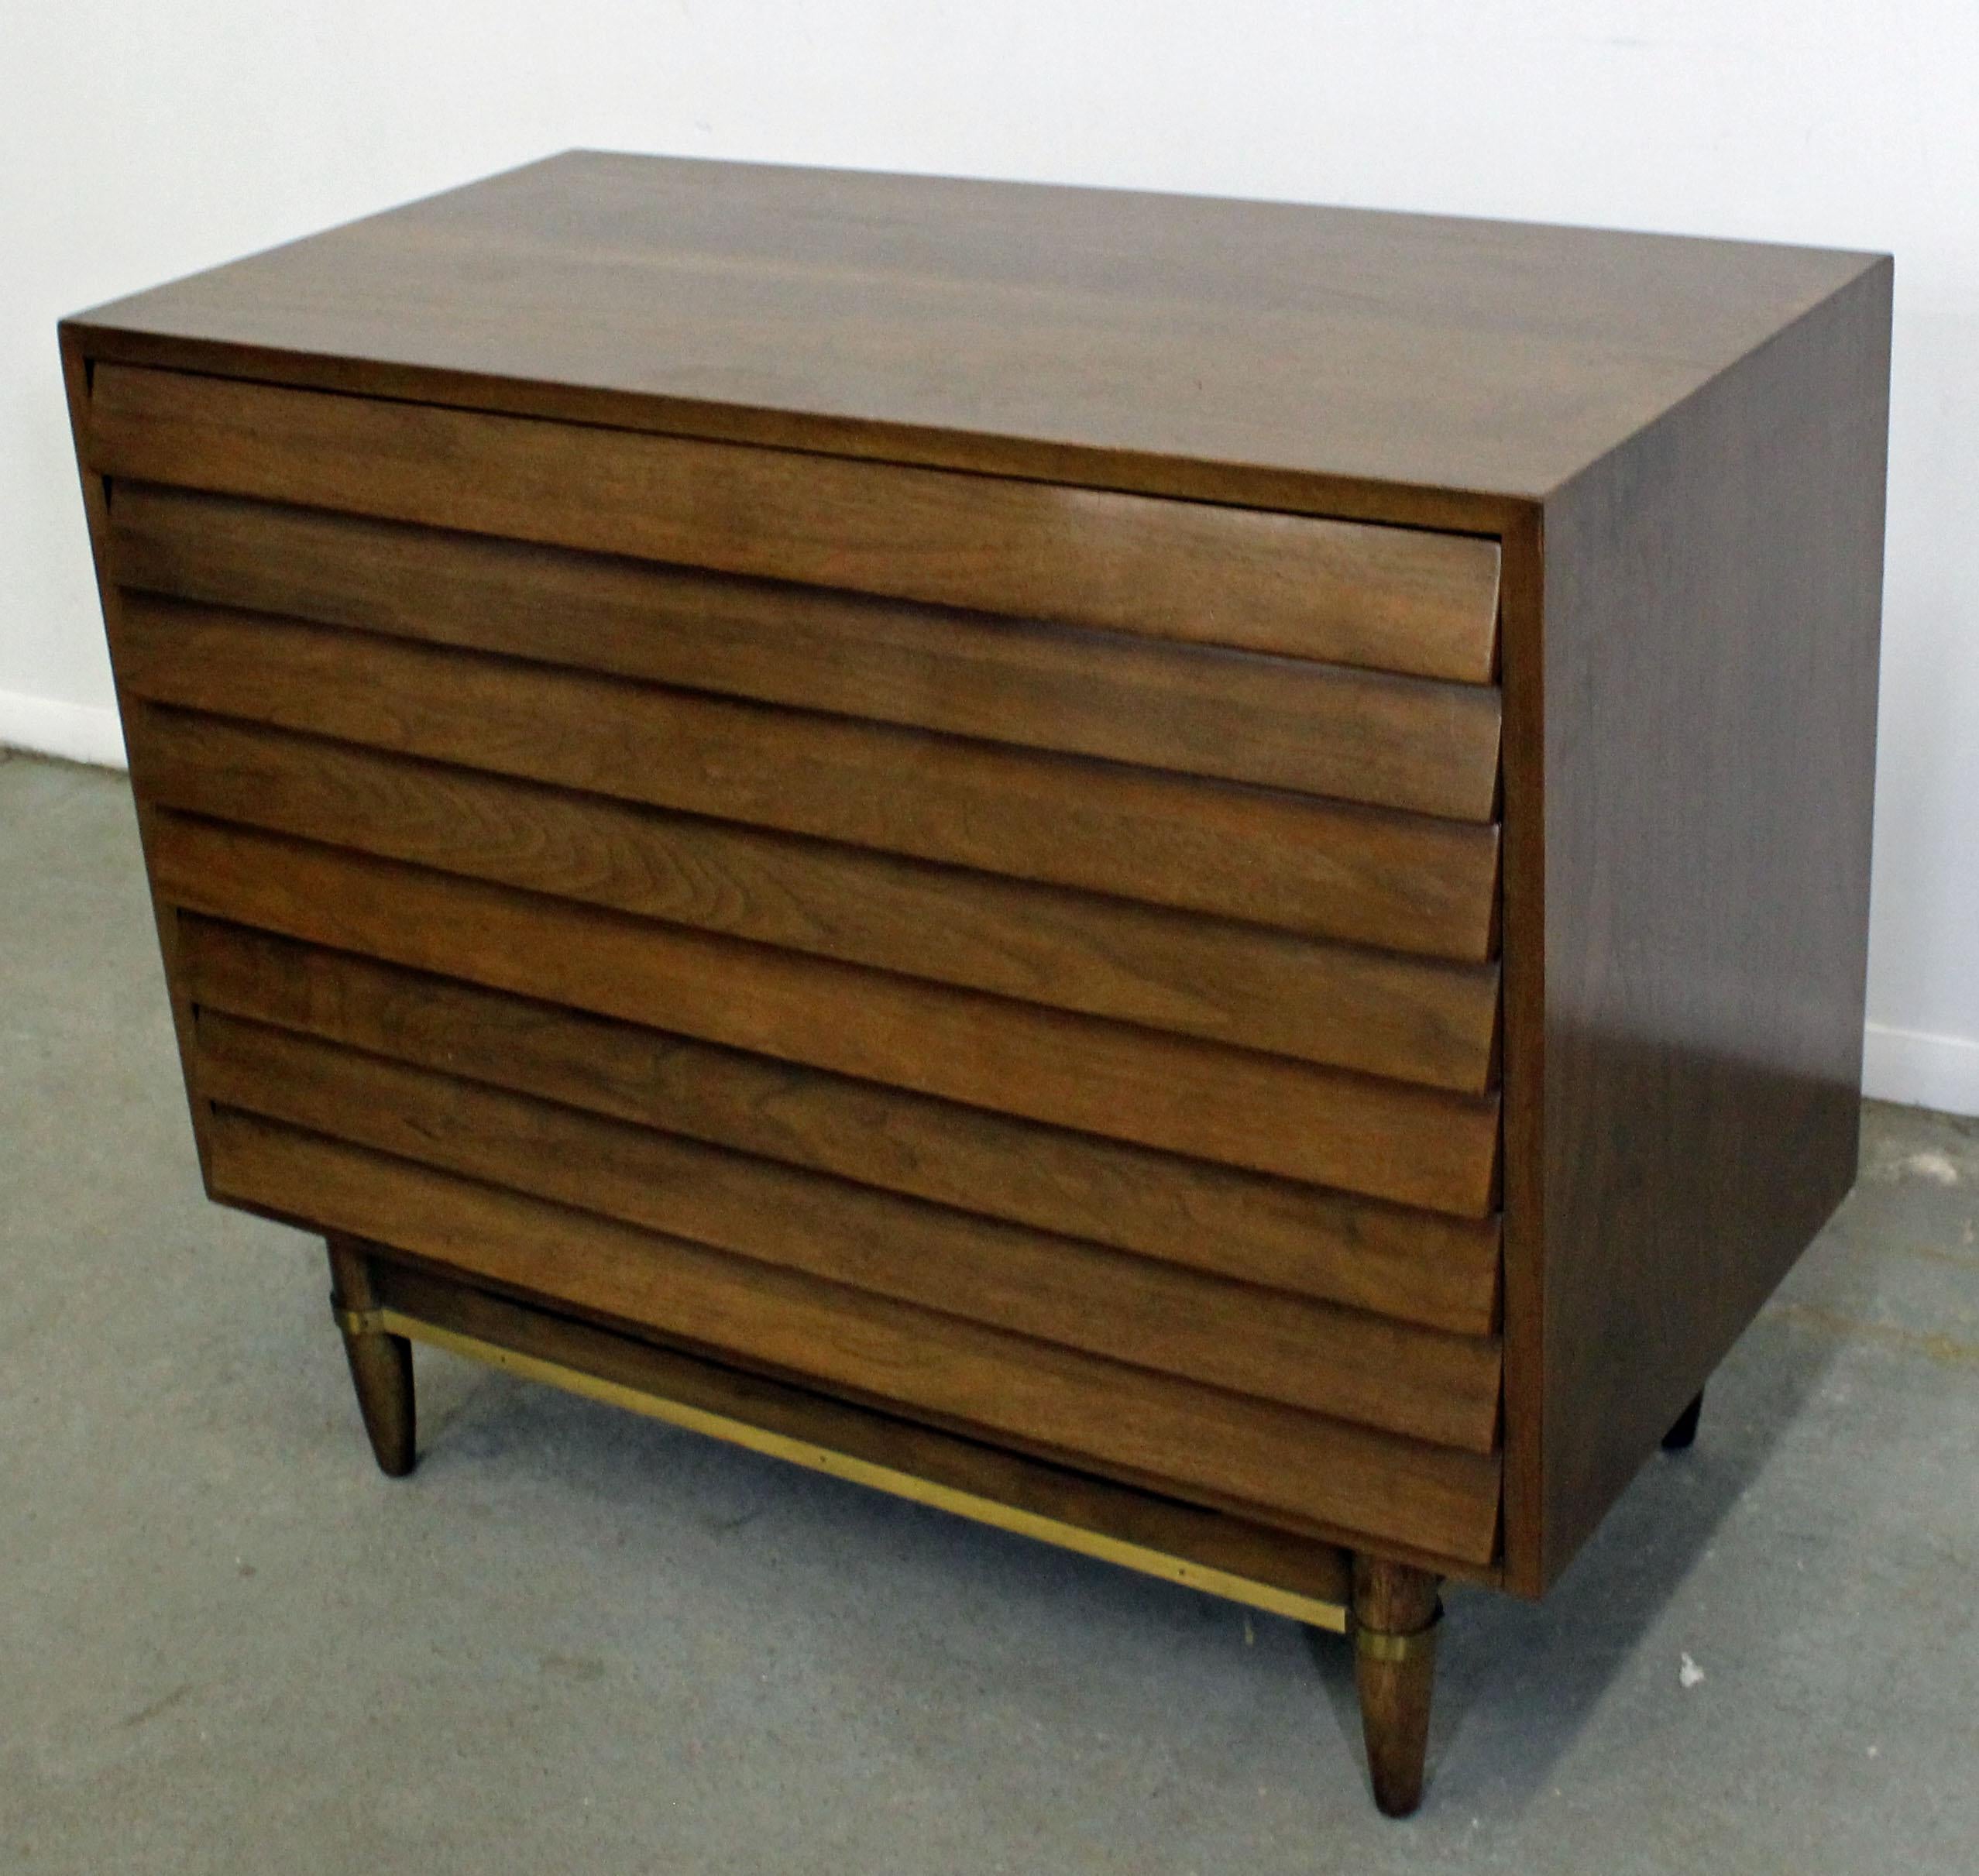 Offered is a bachelor chest, designed by Merton L. Gershun for American of Martinsville's 